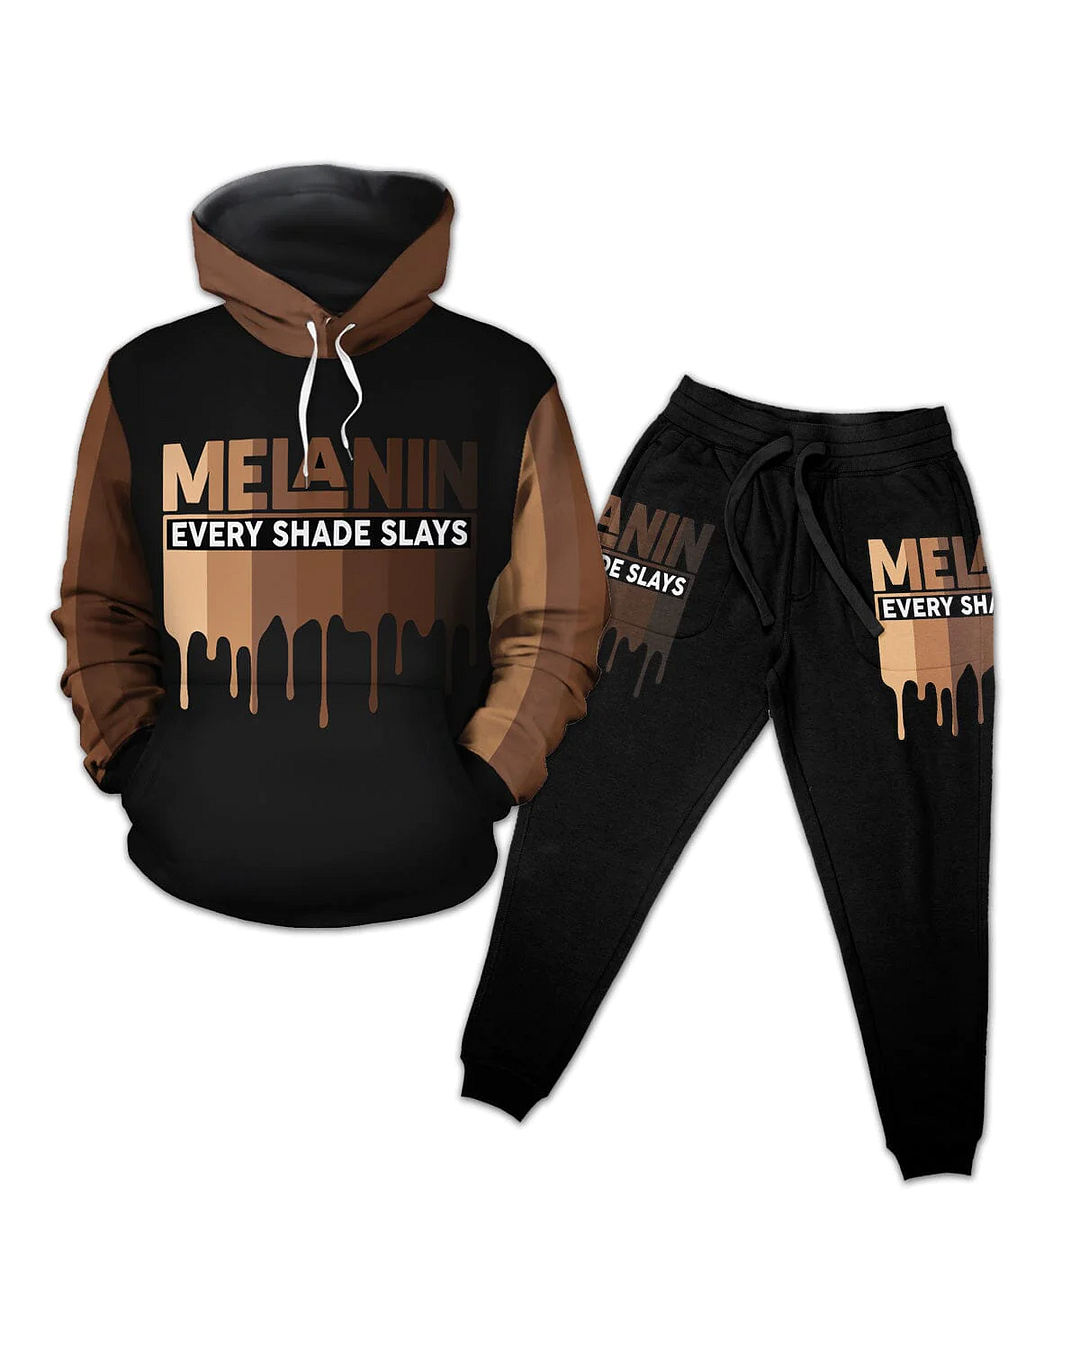 Every Shade Slays Melanin All-over Hoodie And Joggers Set